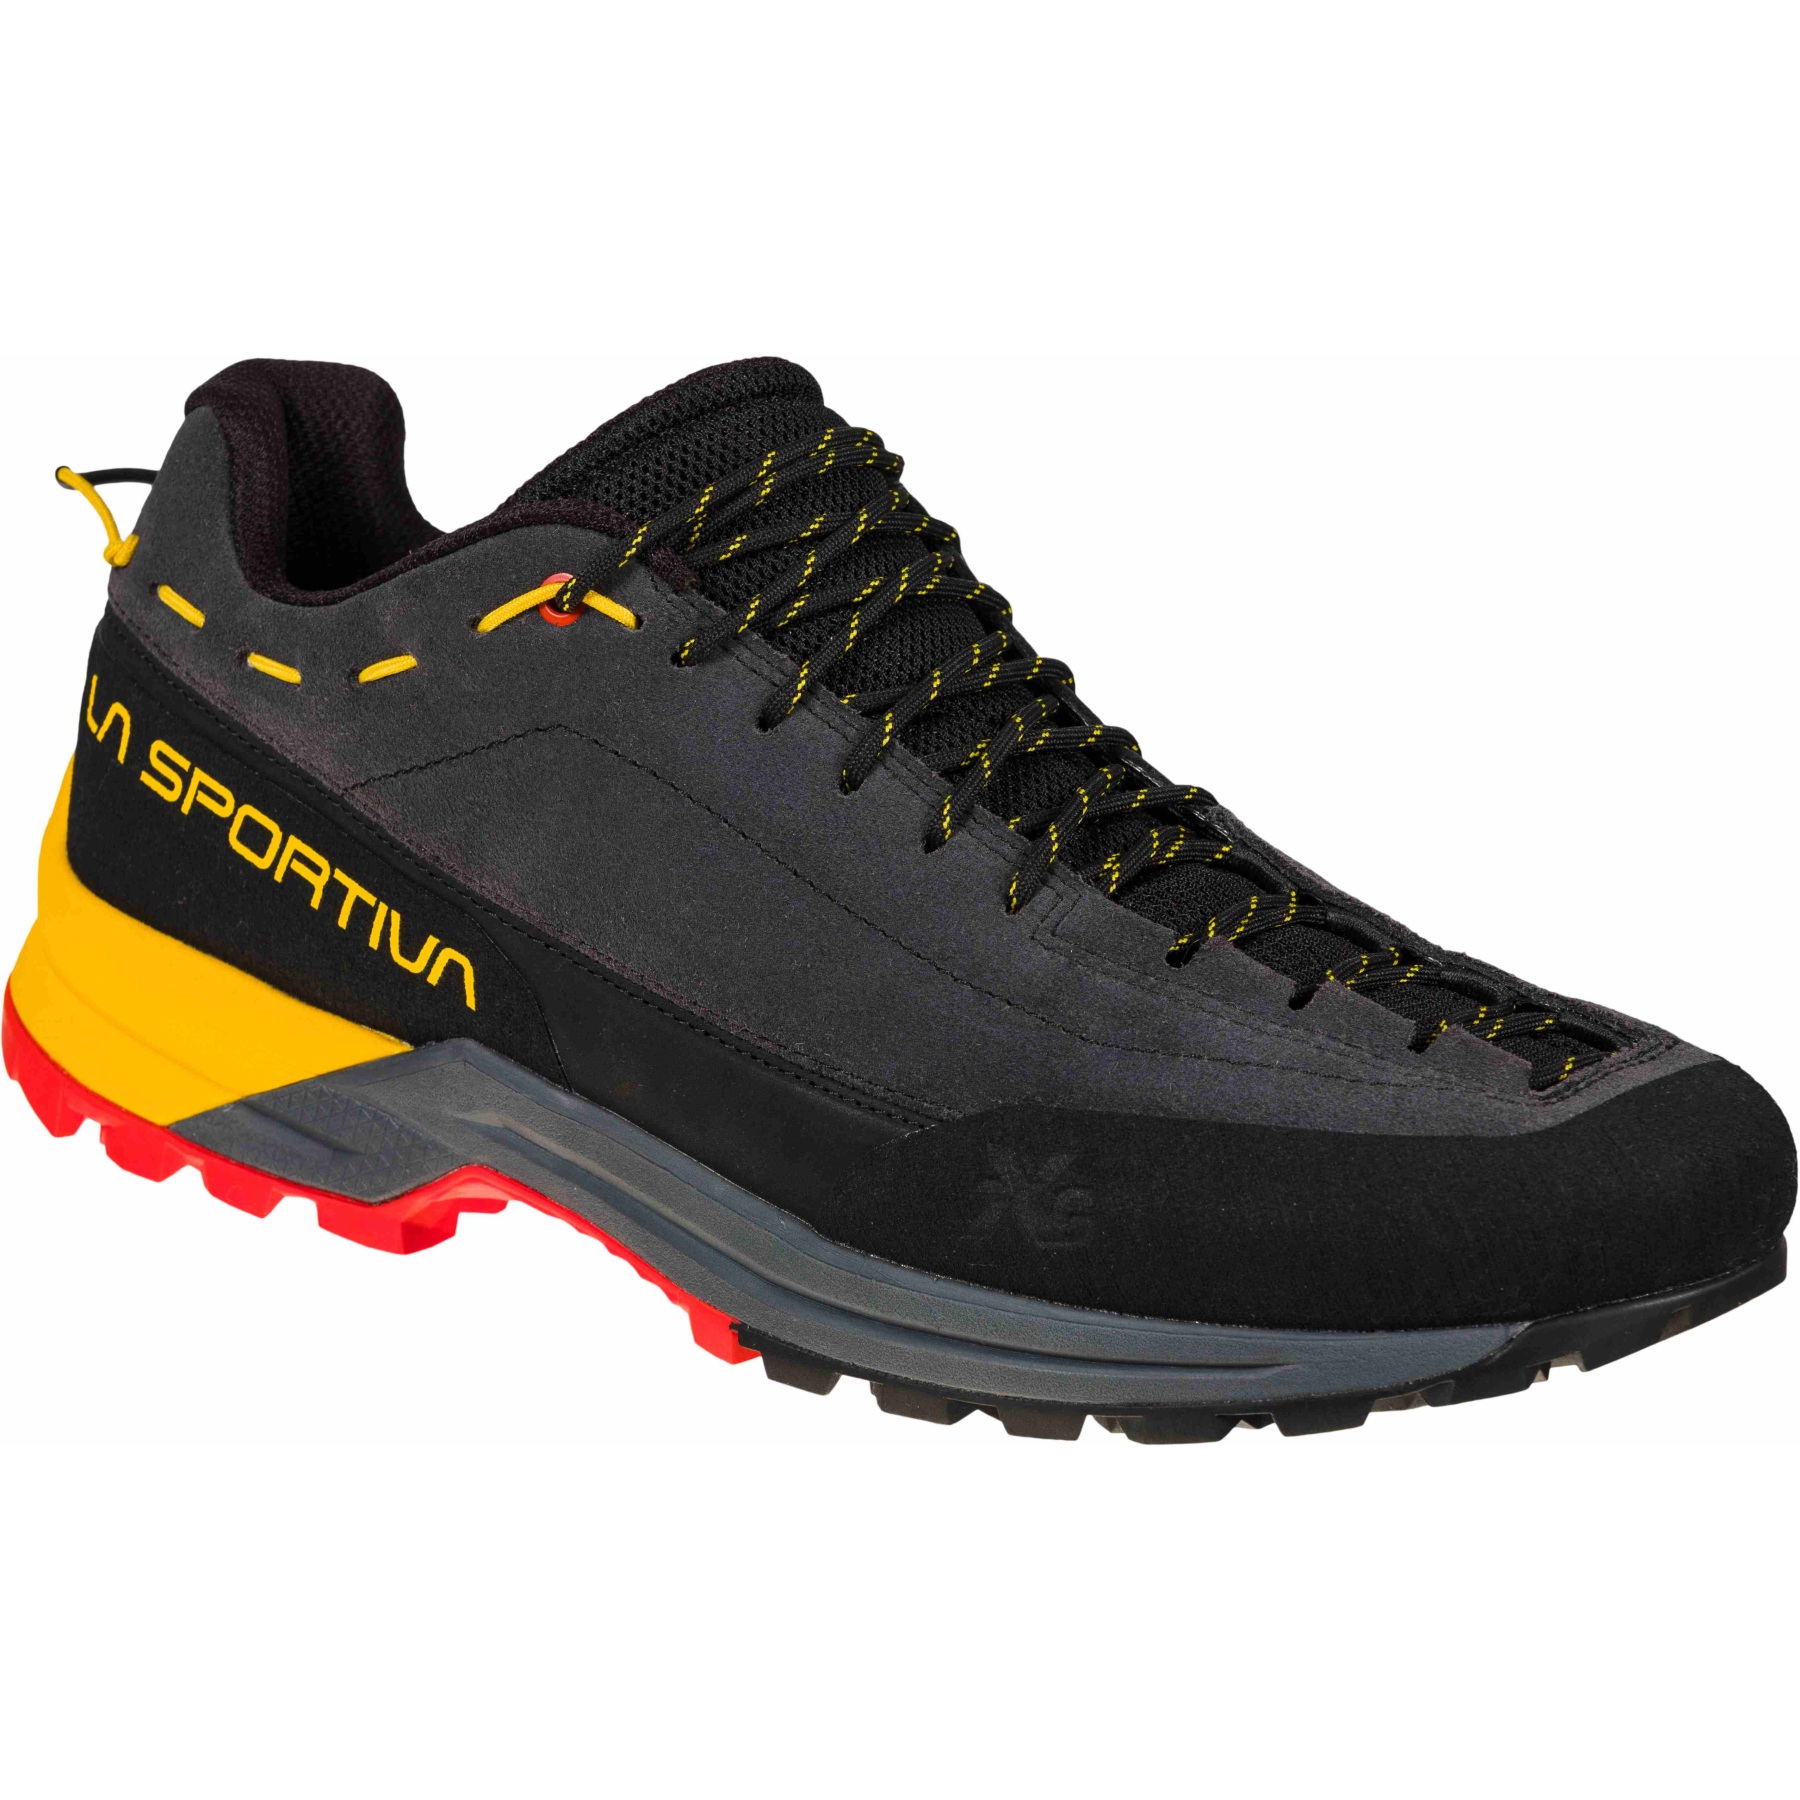 Picture of La Sportiva TX Guide Leather Approach Shoes - Carbon/Yellow